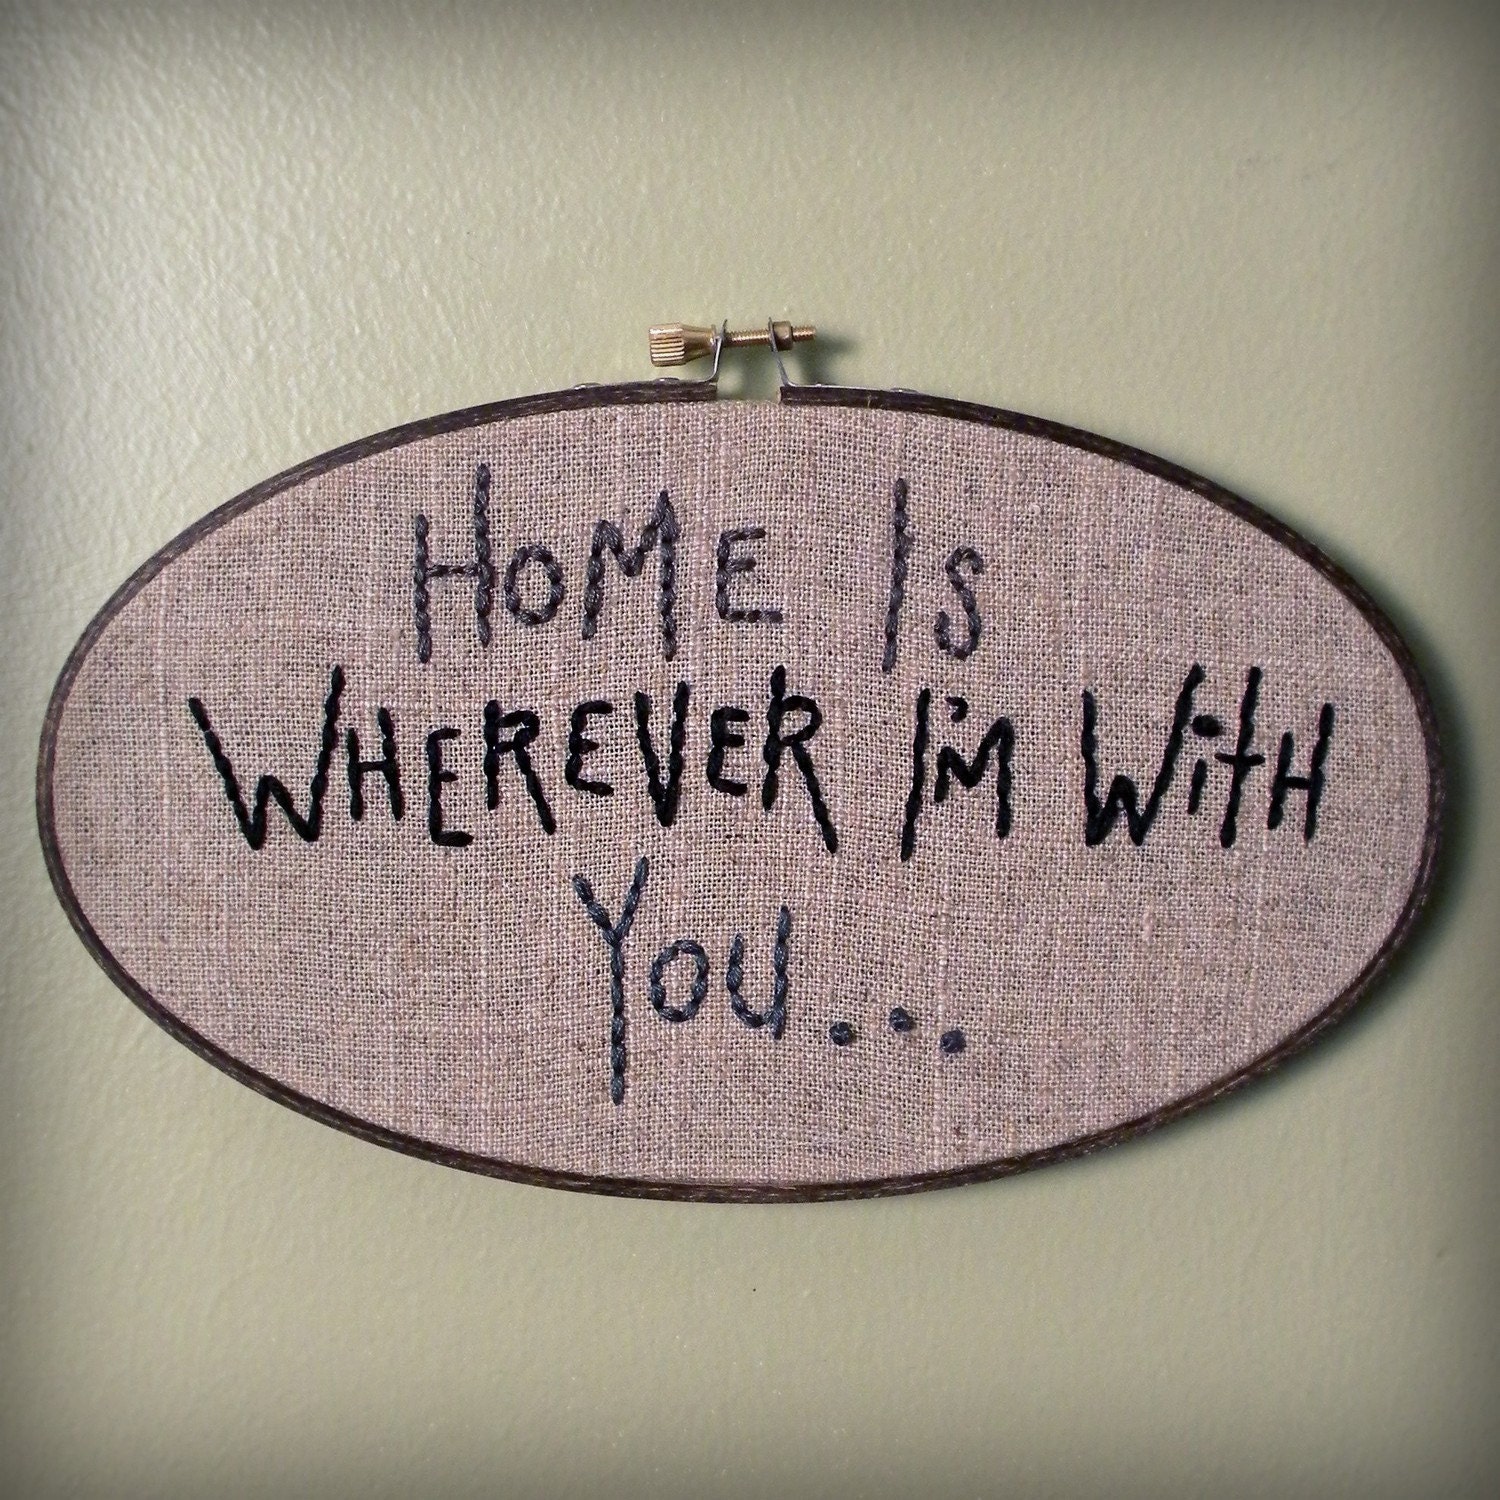 home is wherever i'm with you... embroidered wall art